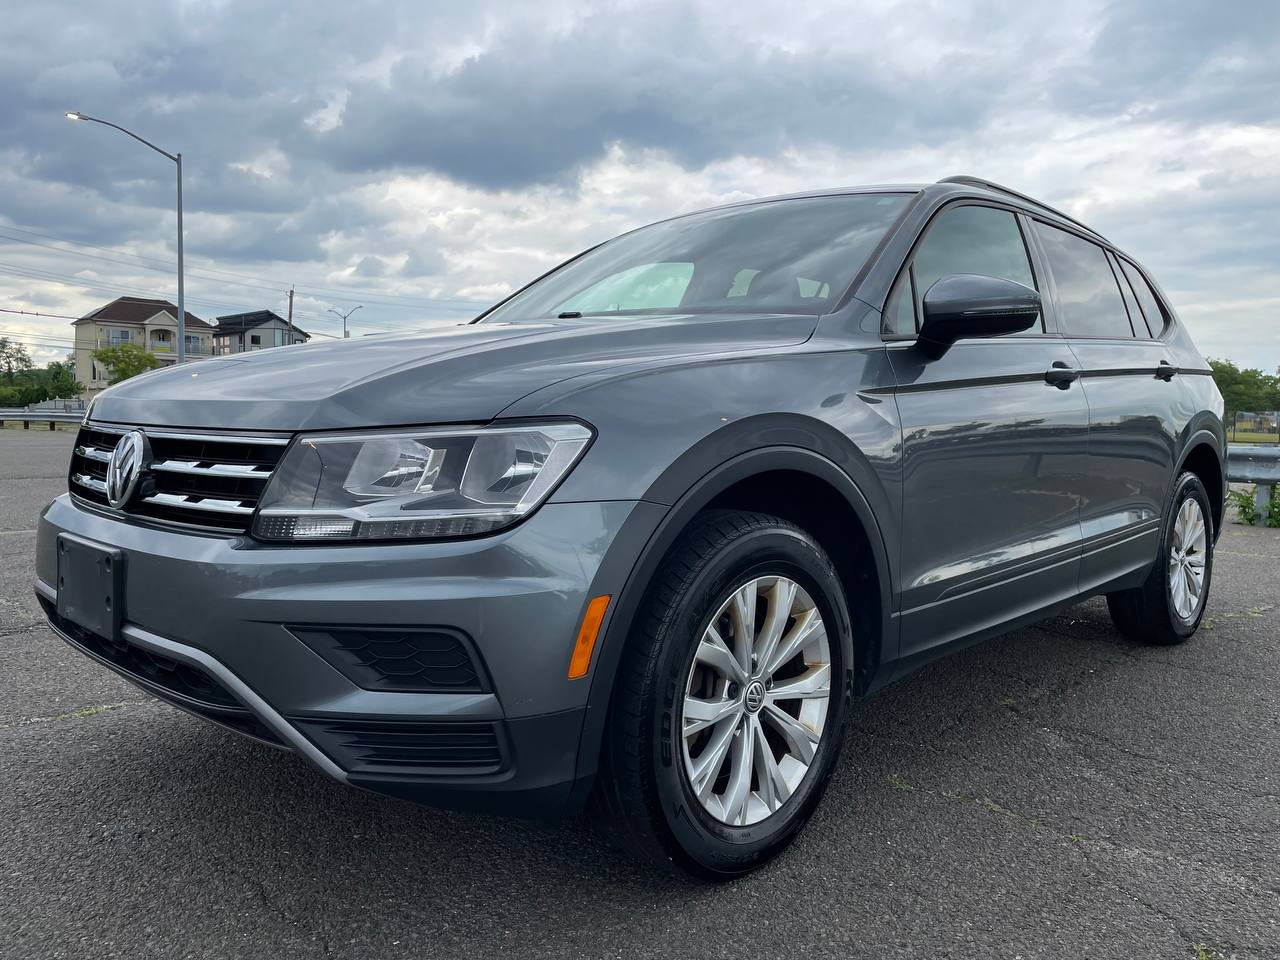 Used Car - 2018 Volkswagen Tiguan 2.0T S 4Motion AWD for Sale in Staten Island, NY